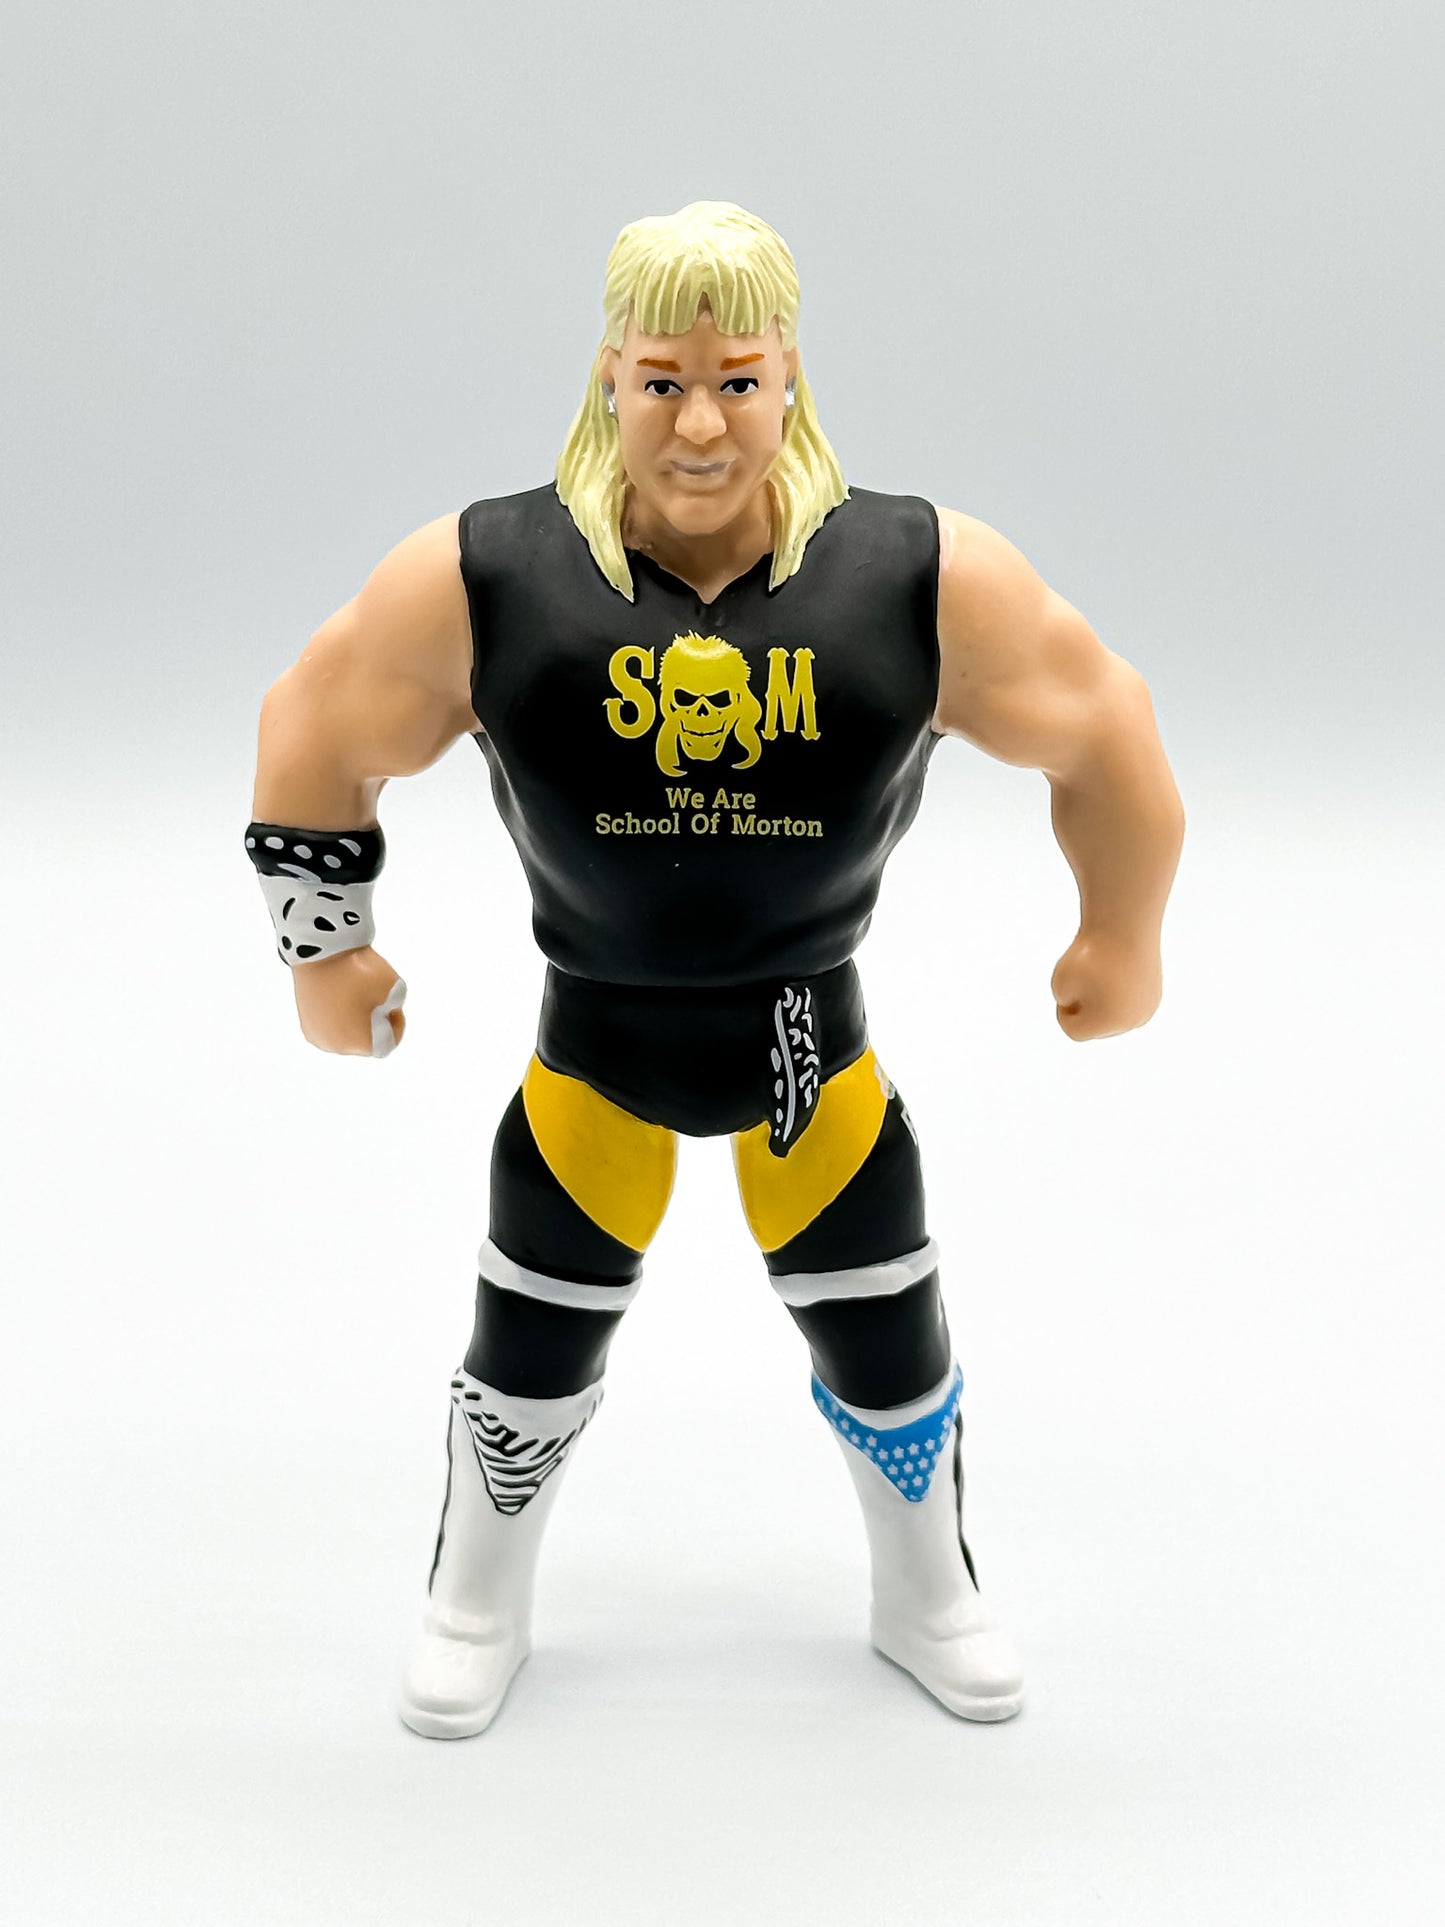 Ricky Morton Exclusive Major Bendie (FREE US SHIPPING)